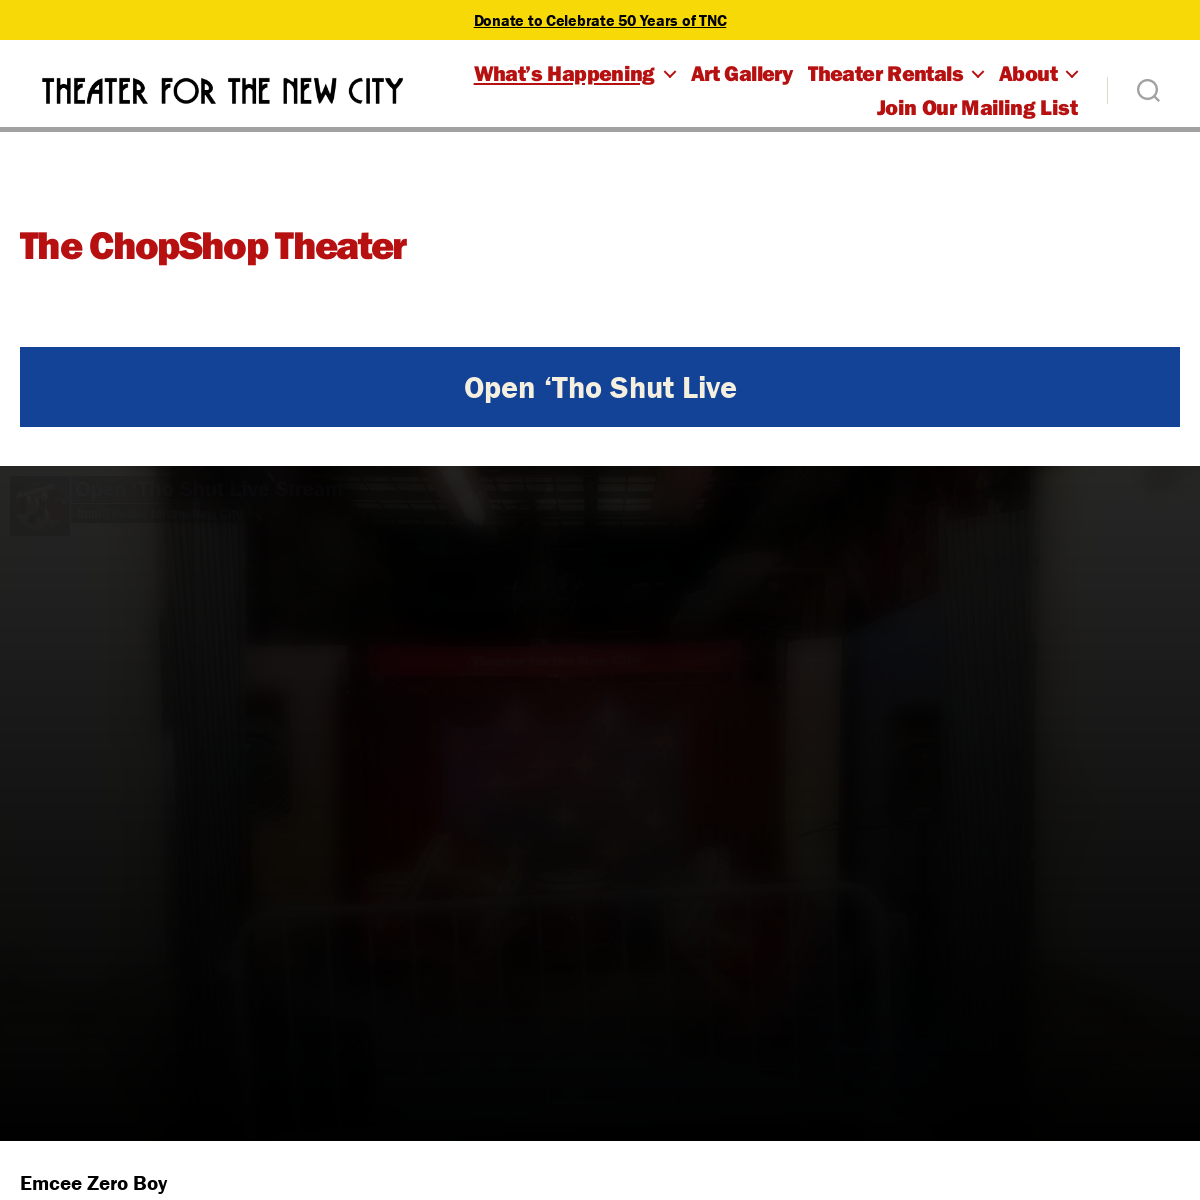 A complete backup of theaterforthenewcity.net